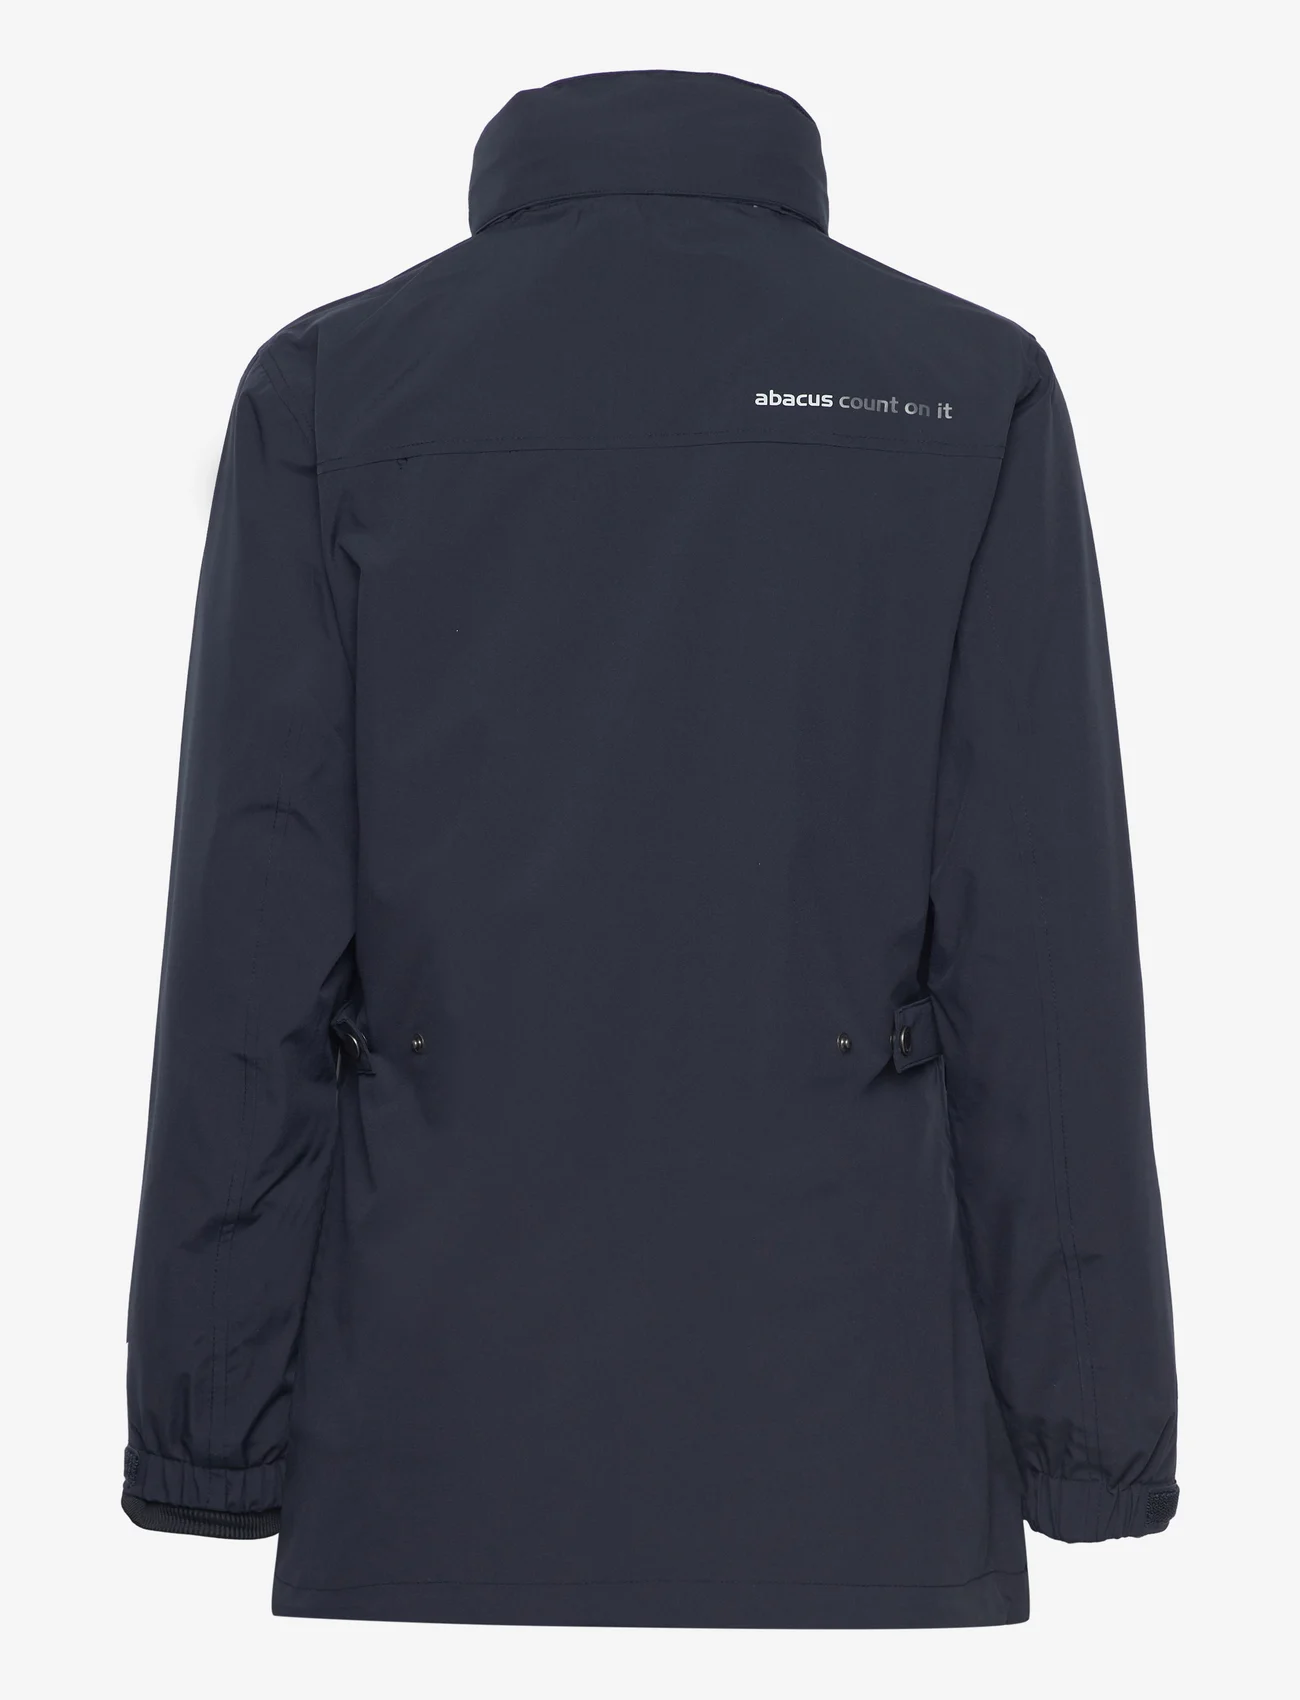 Abacus - Lds Staff 3 in1 jacket - parkas - navy - 1